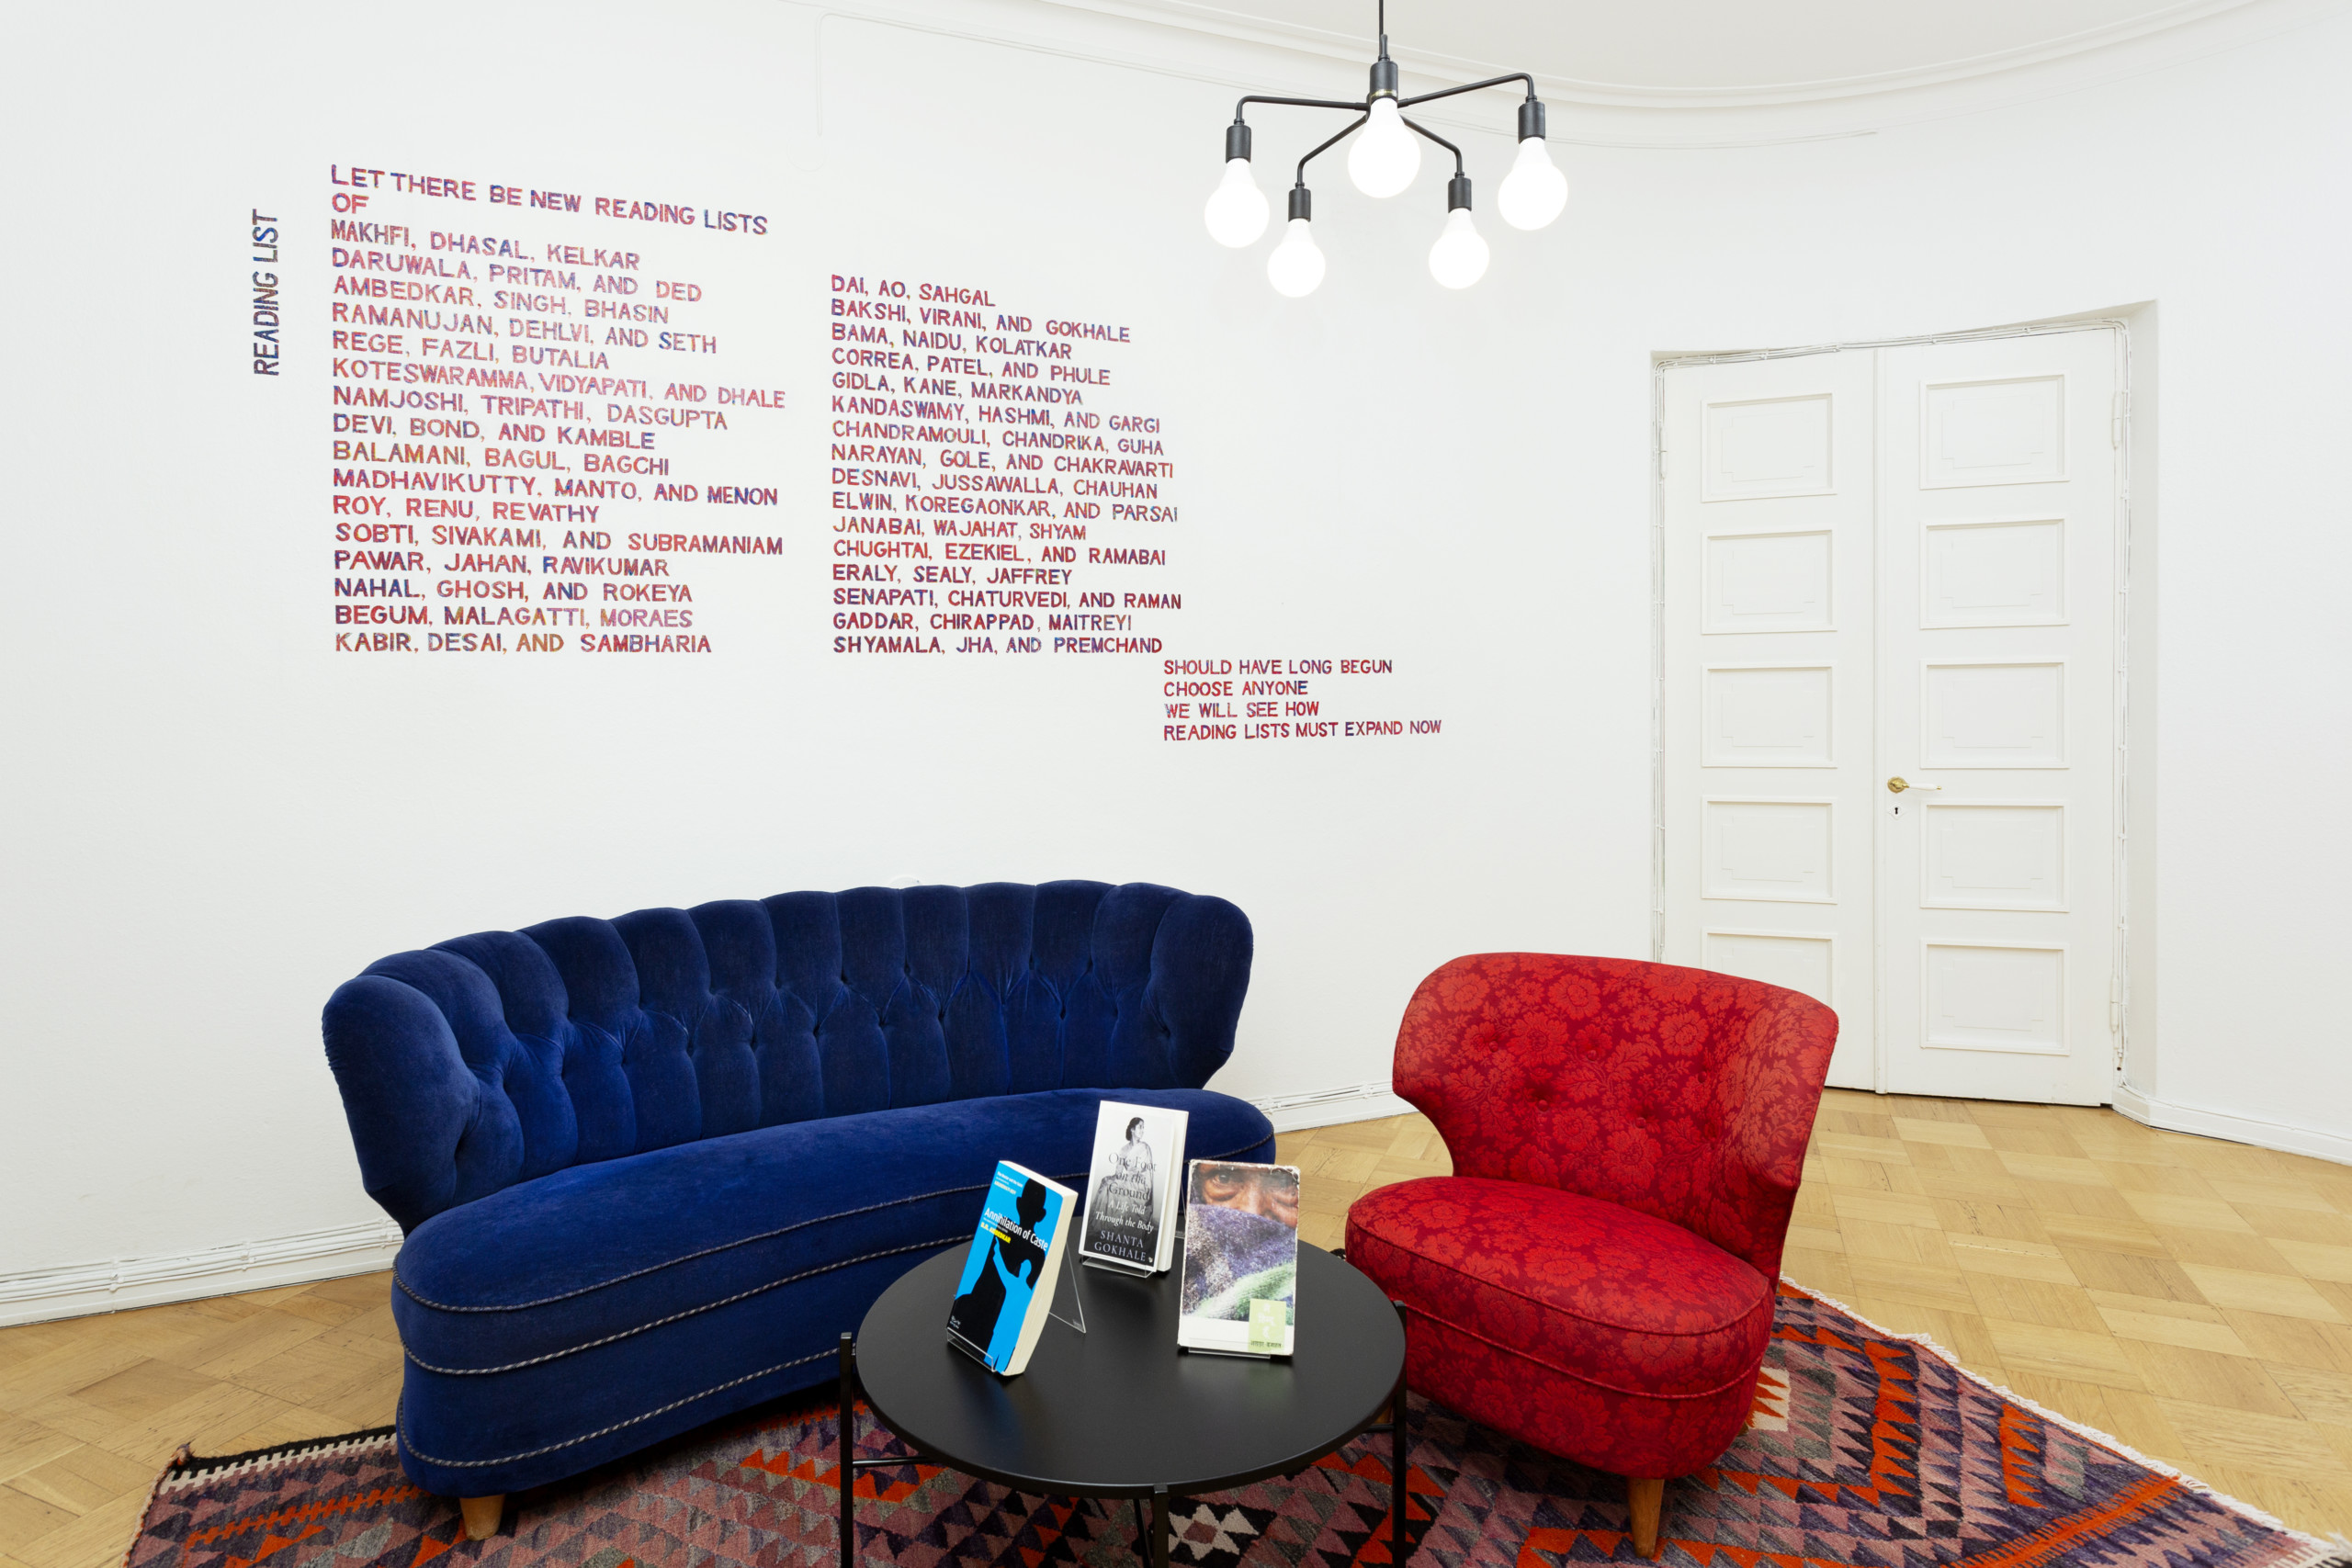 A sofa and an armchair in small room or foyer. Text on the wall.